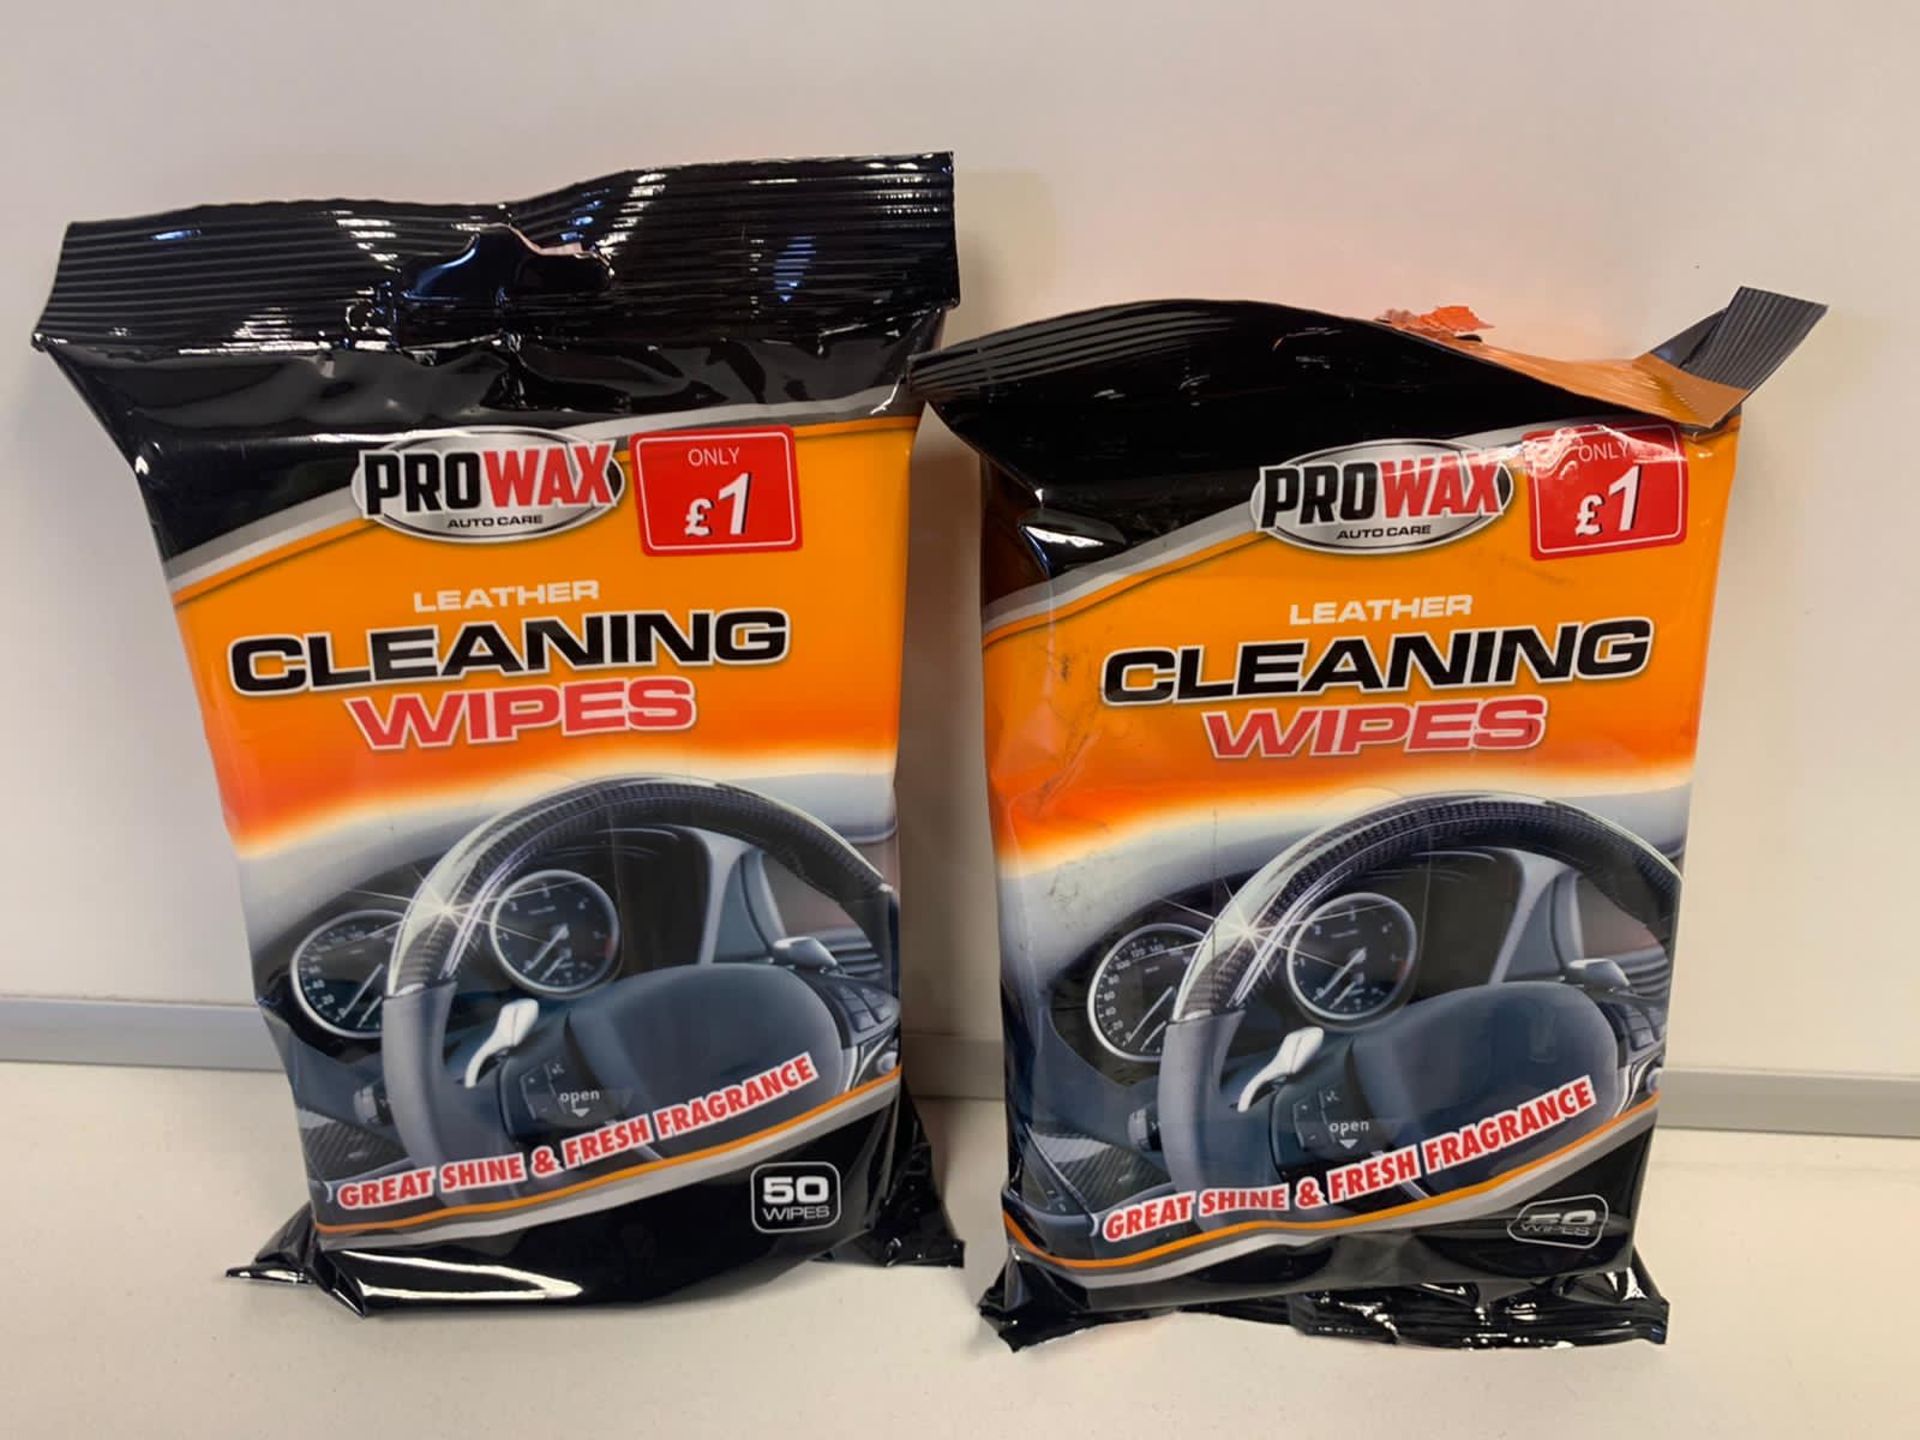 120 X PACKS OF 50 PRO WAX LEATHER CLEANING WIPES IN 5 BOXES